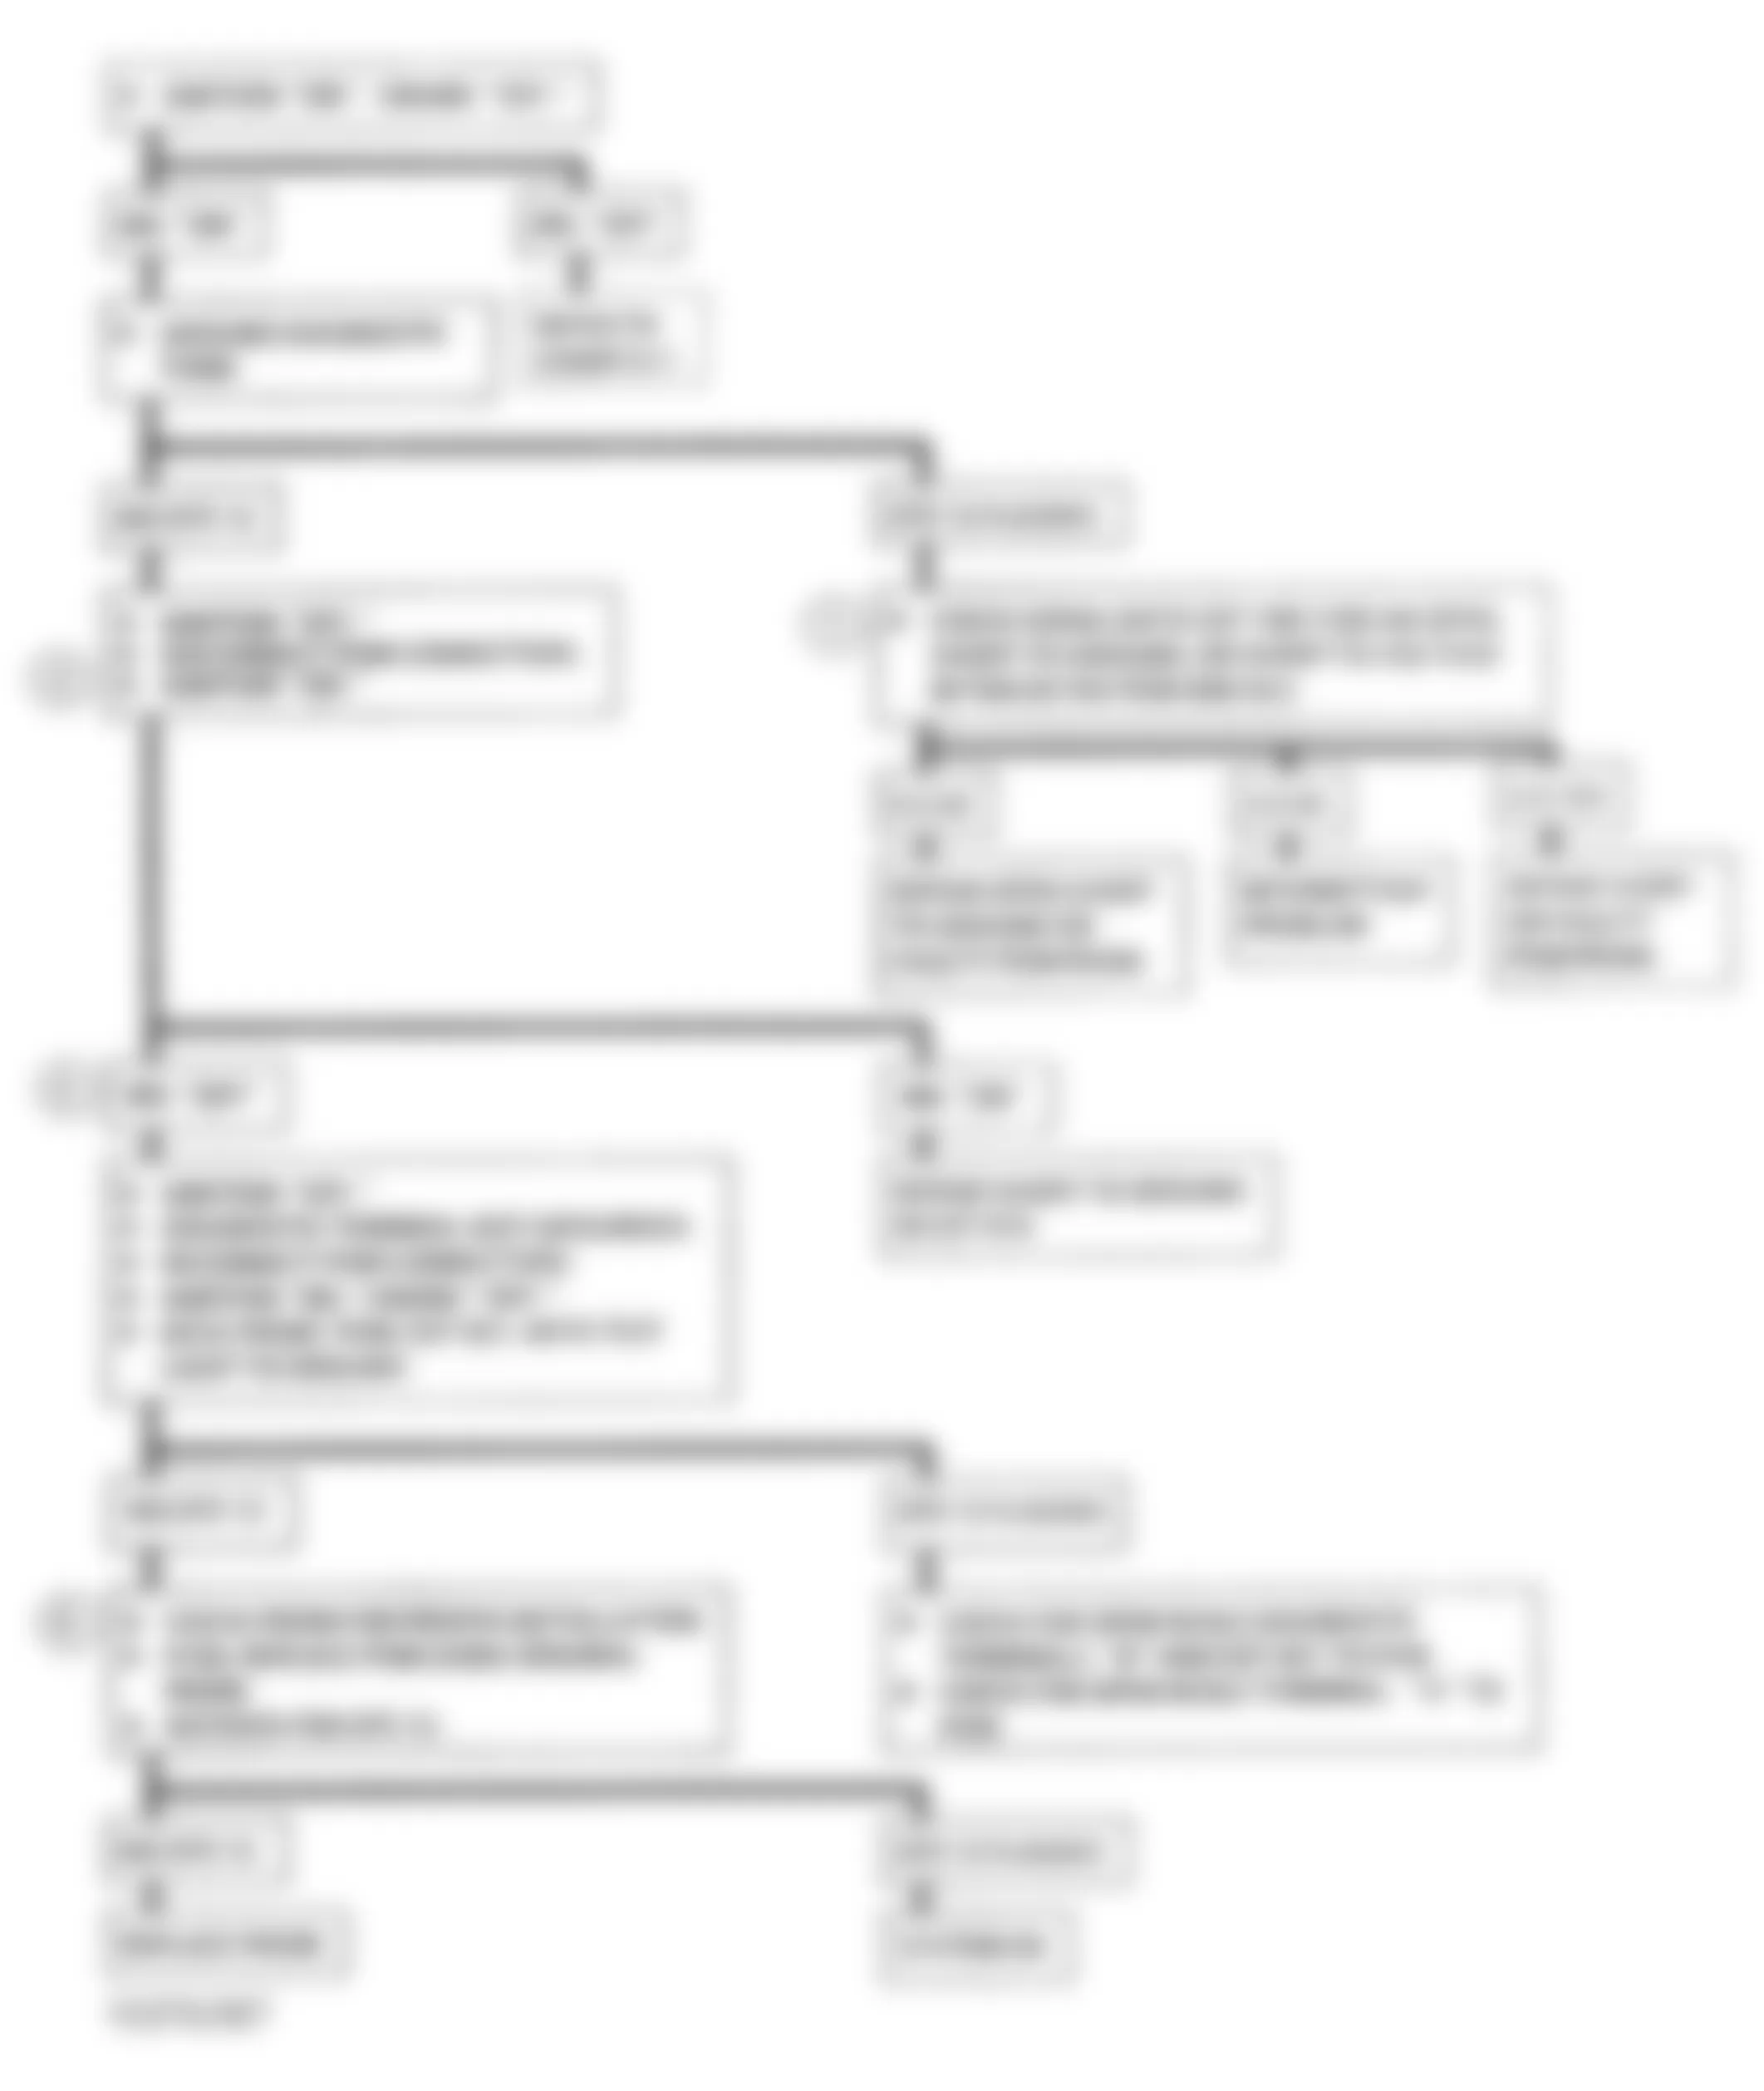 Chevrolet Suburban K1500 1993 - Component Locations -  A-2, Flowchart, No DLC Data, MIL On All Time - A/T